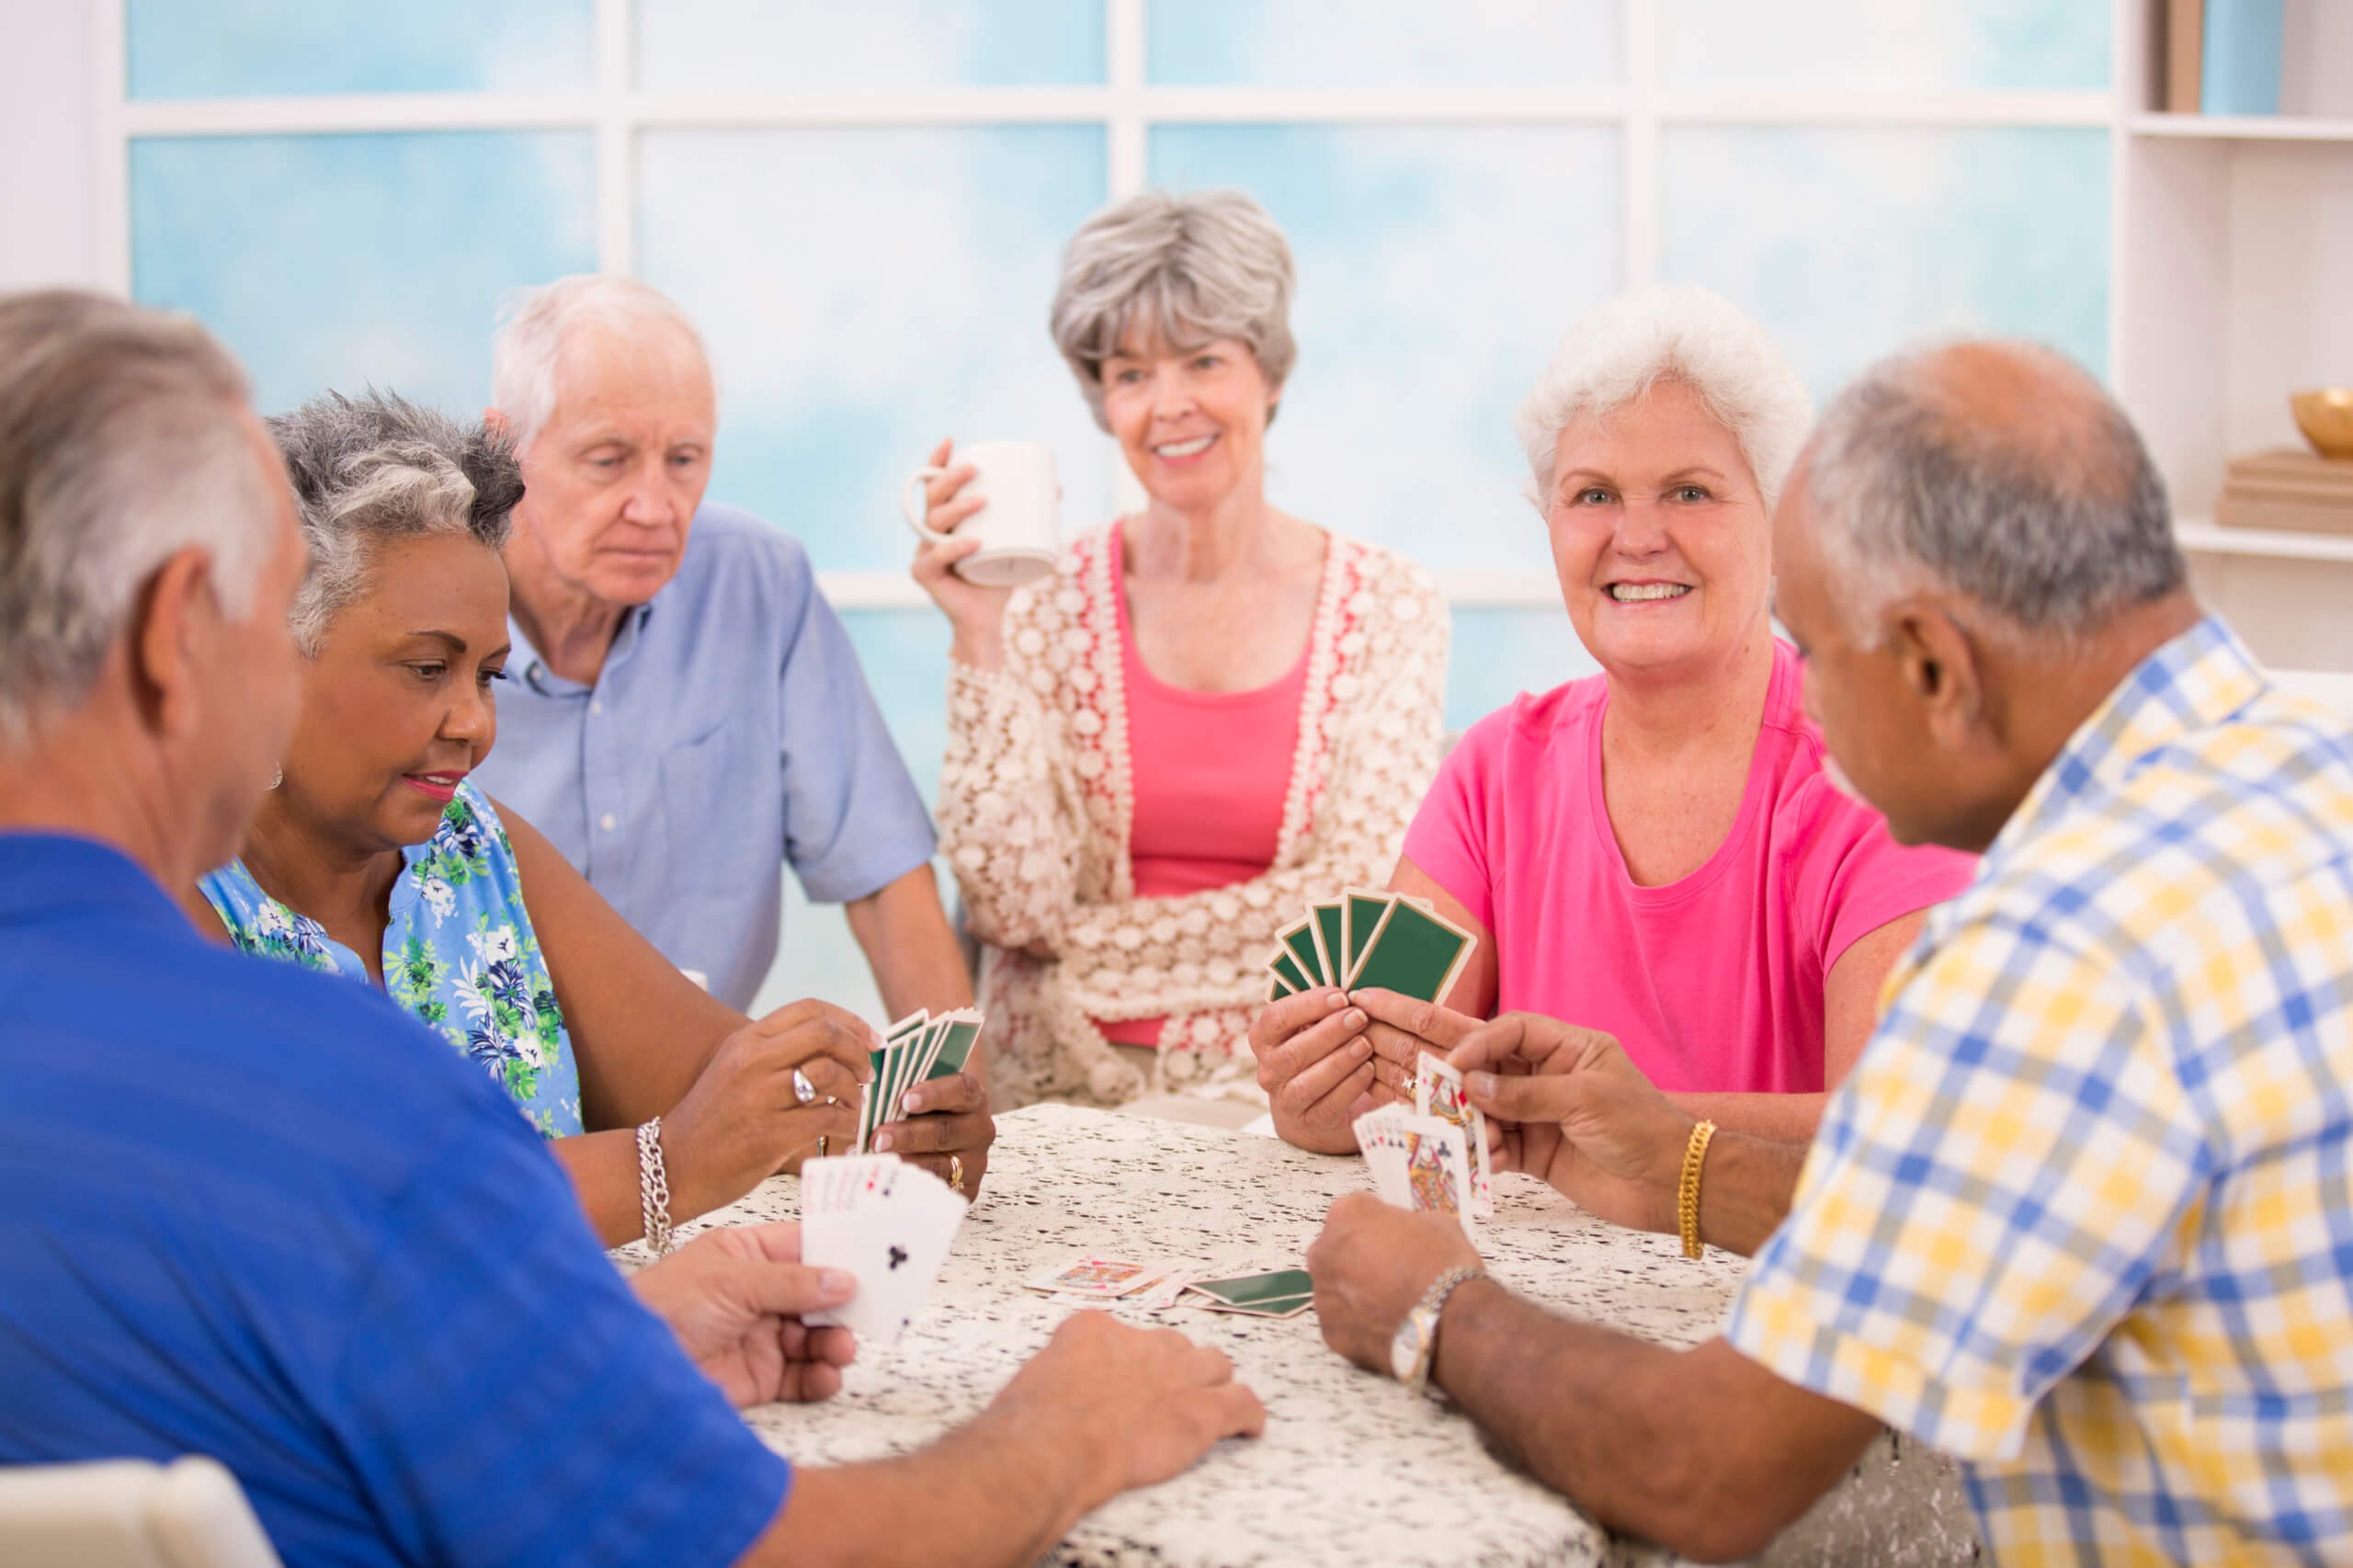 Senior adult friends playing cards. Home or community center setting.